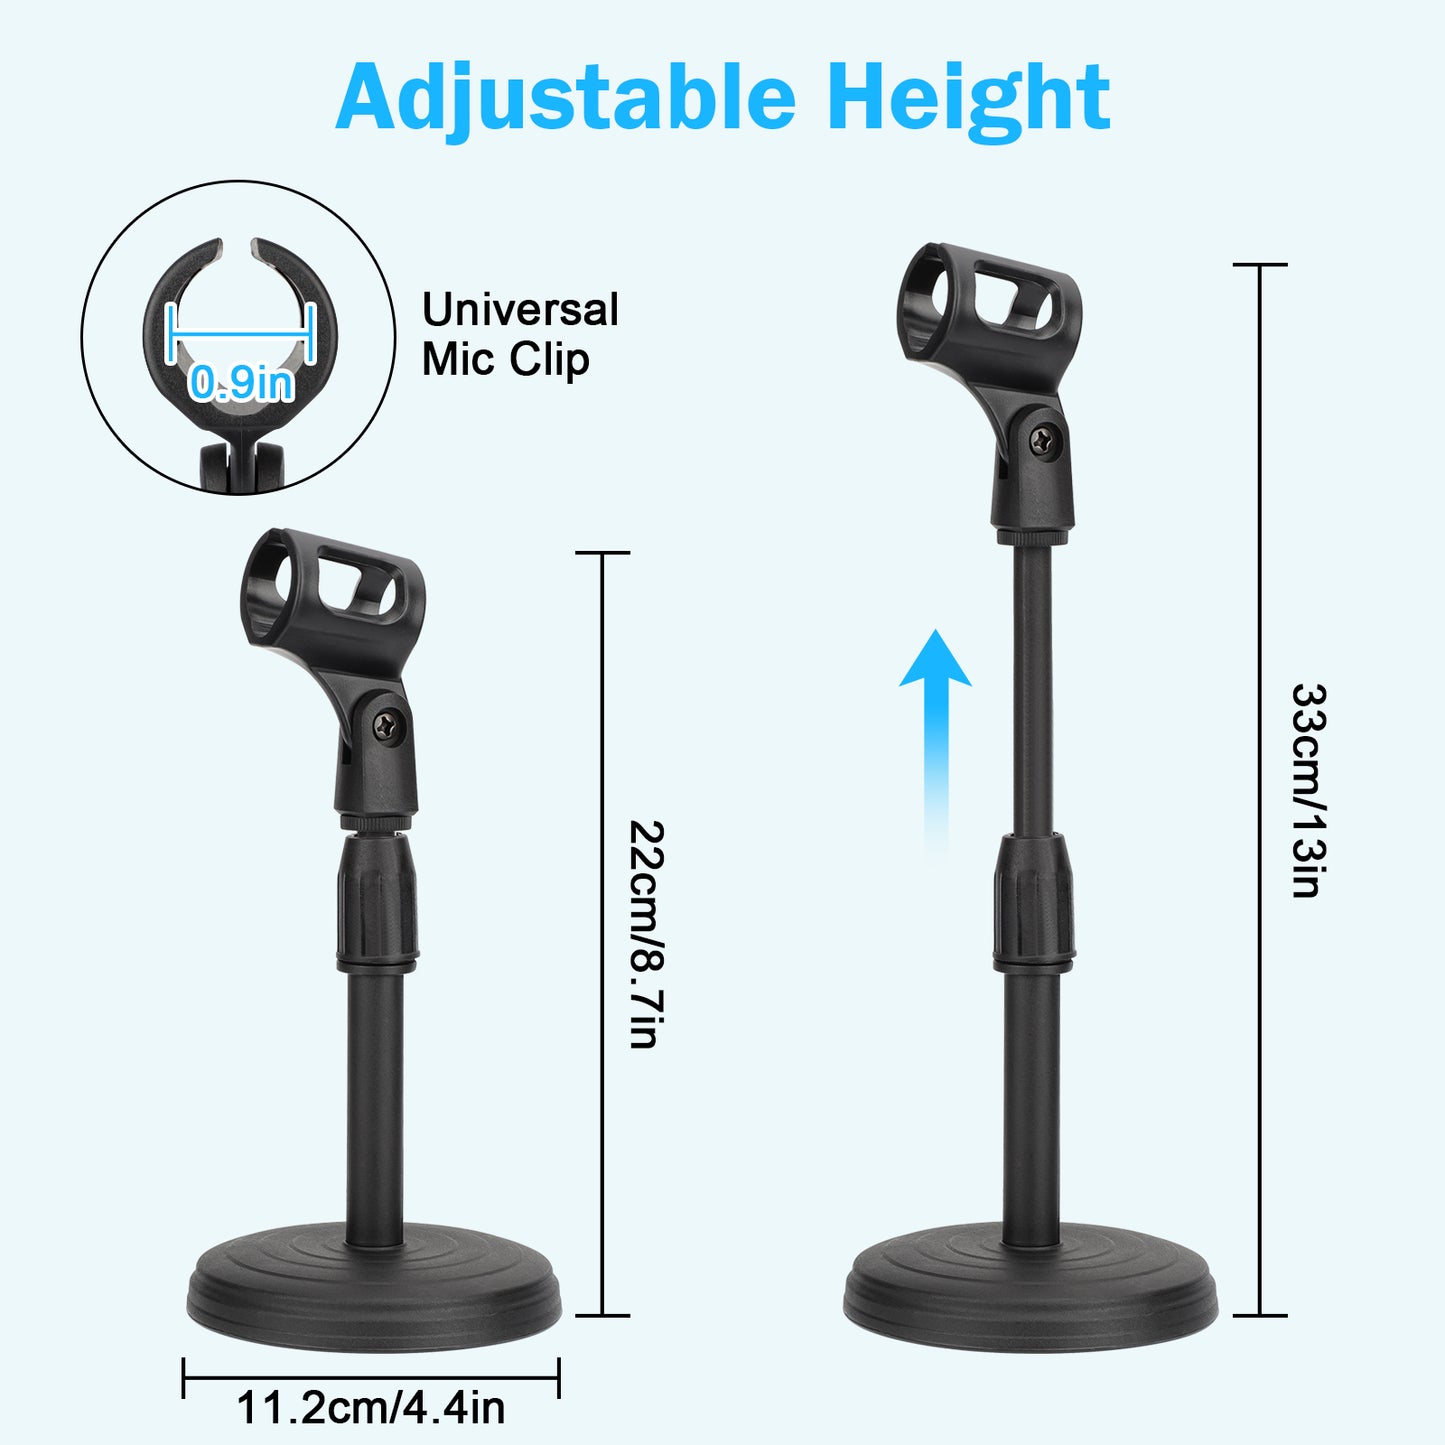 Adjustable Desktop Microphone Stand - Stable Weighted Base, Screw-In Style, Universal Mic Clip, Black